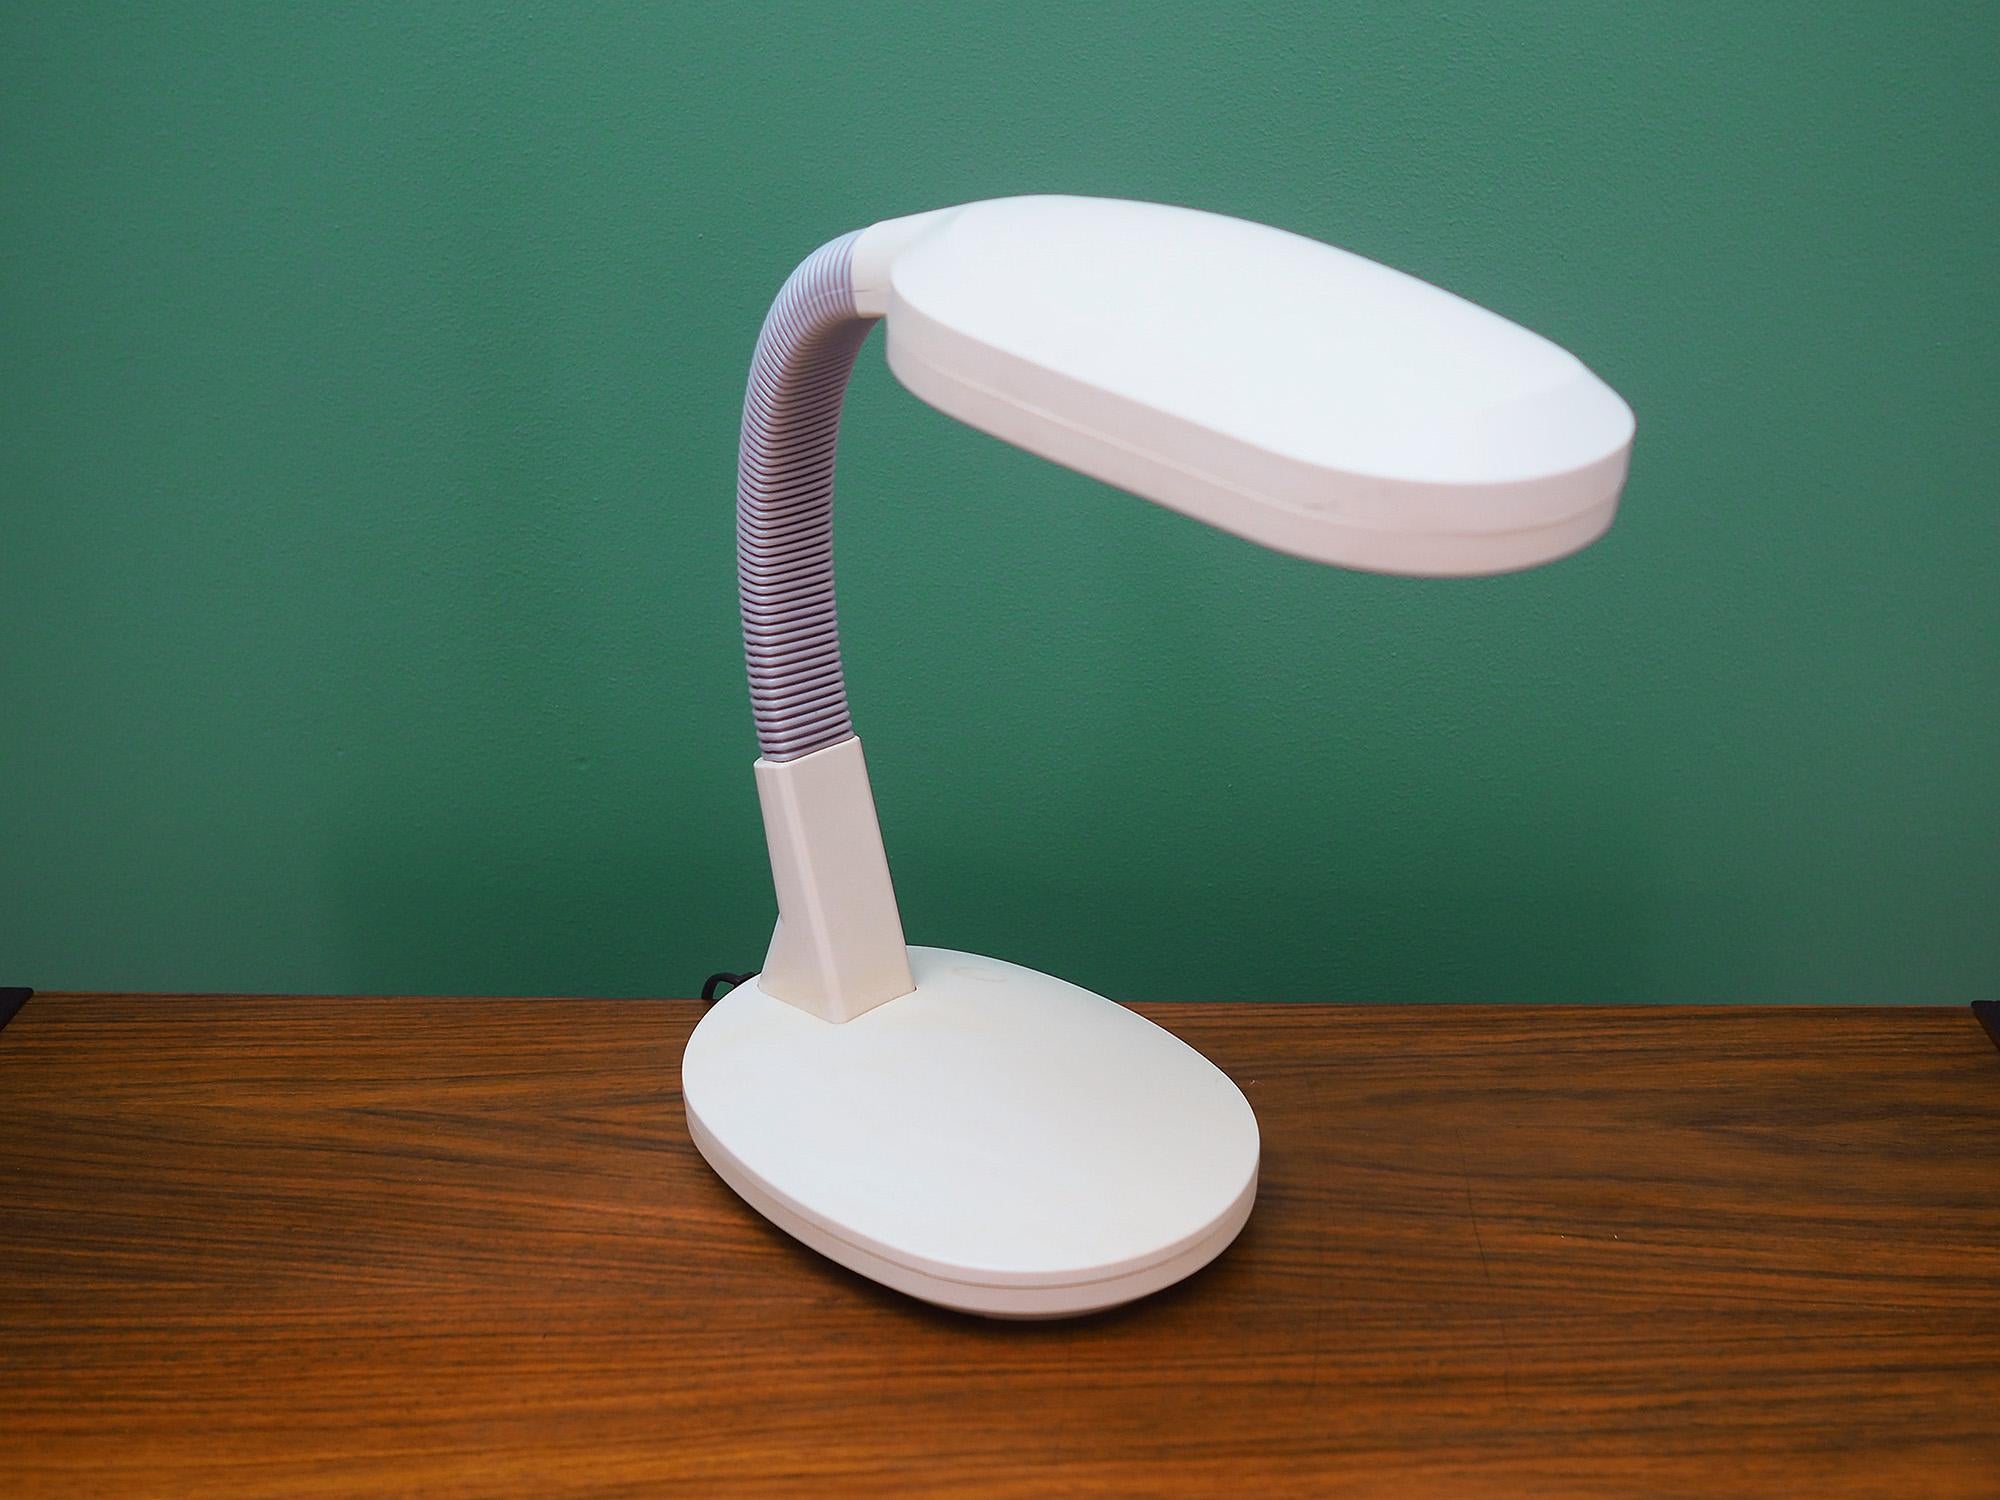 Fantastic desk lamp from the 1960s-1970s. Scandinavian design, Minimalist form. Lamp is entirely made of plastic. Preserved in good condition (minor scratches and discoloration) - directly for use.

Dimensions: height 44 cm, width 15 cm, length 14